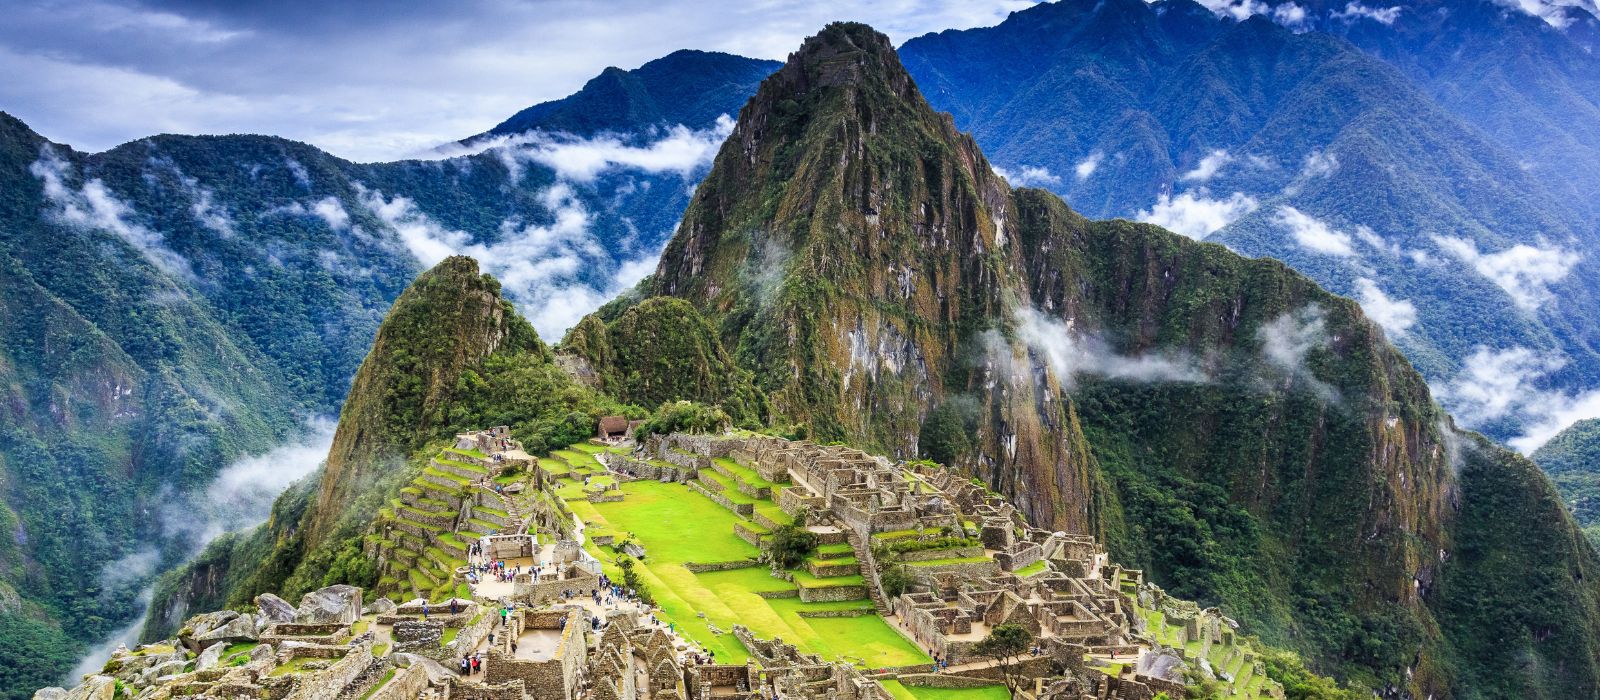 Peru Tours Packages | Peru Holidays Group Tour Packages from India